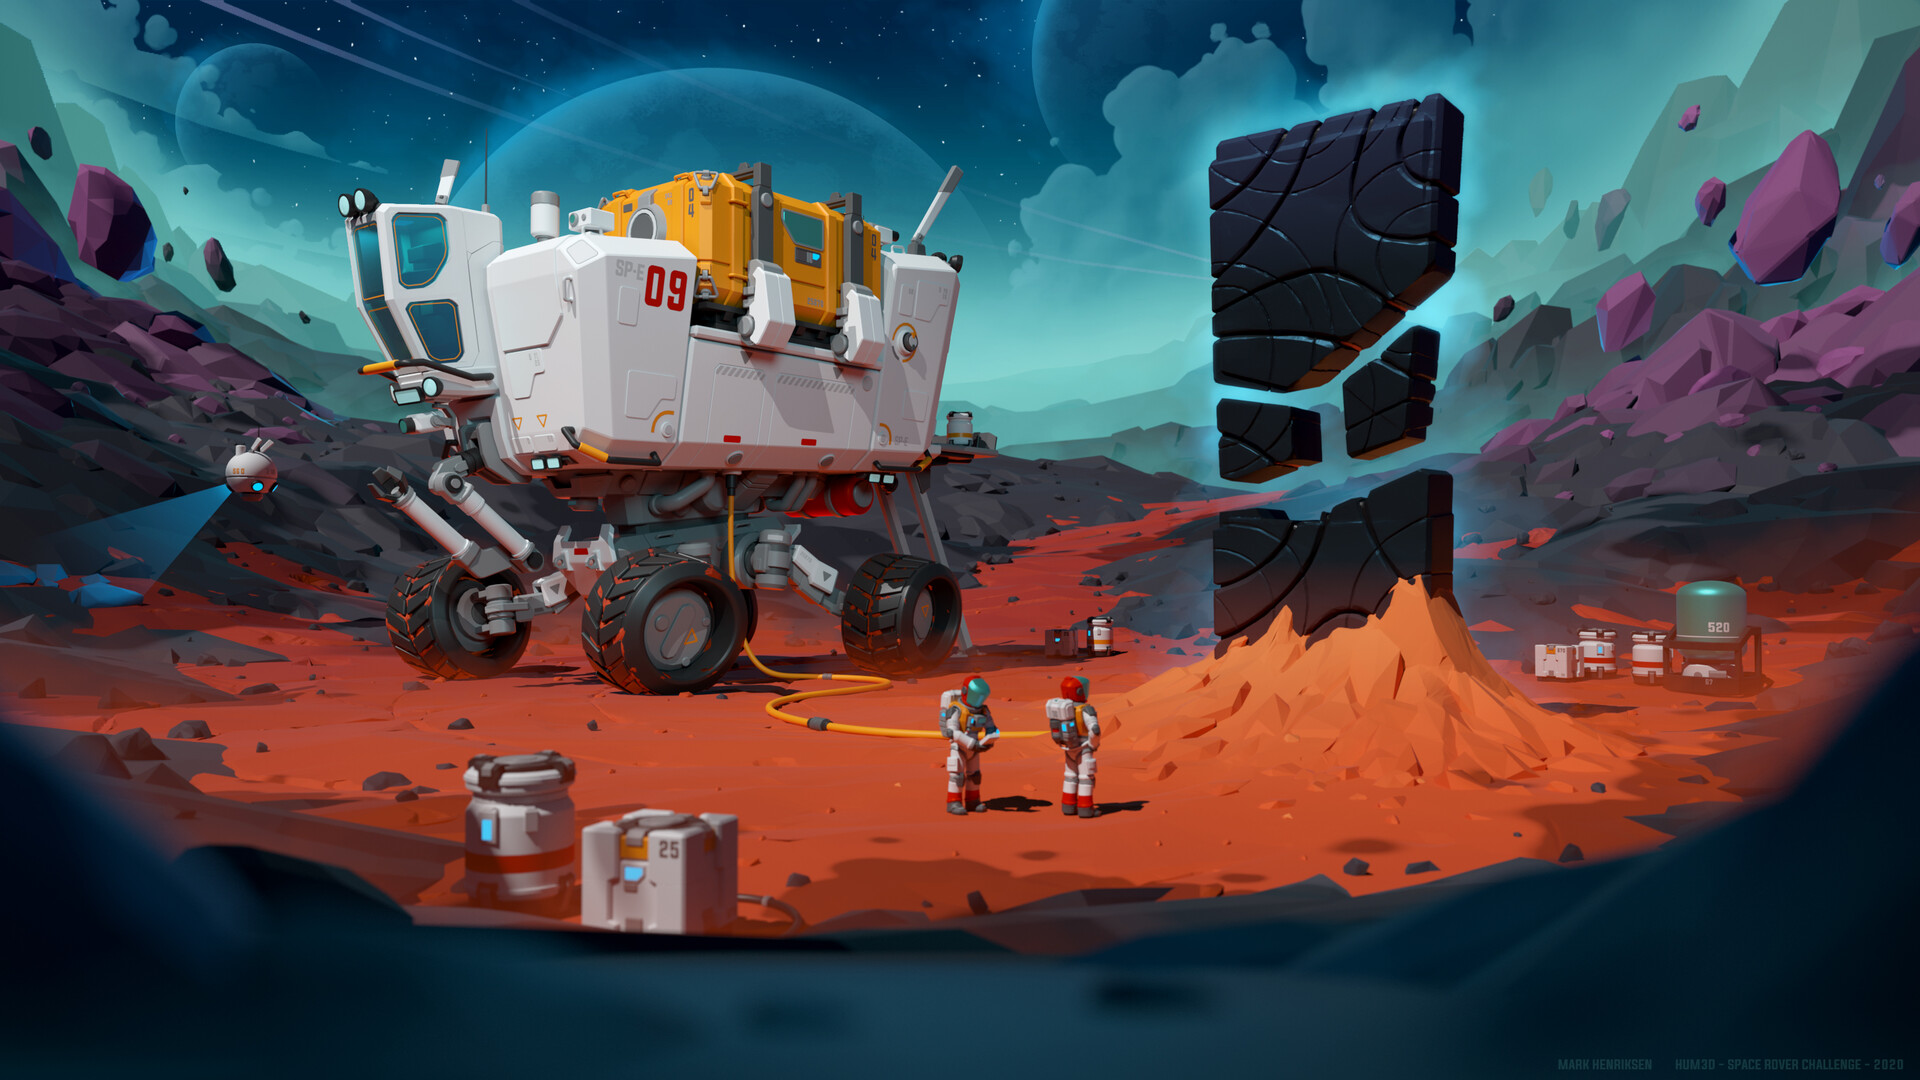 Colorful Science Fiction Artwork Planet Astronaut Vehicle Astroneer No Mans Sky Video Games 1920x1080